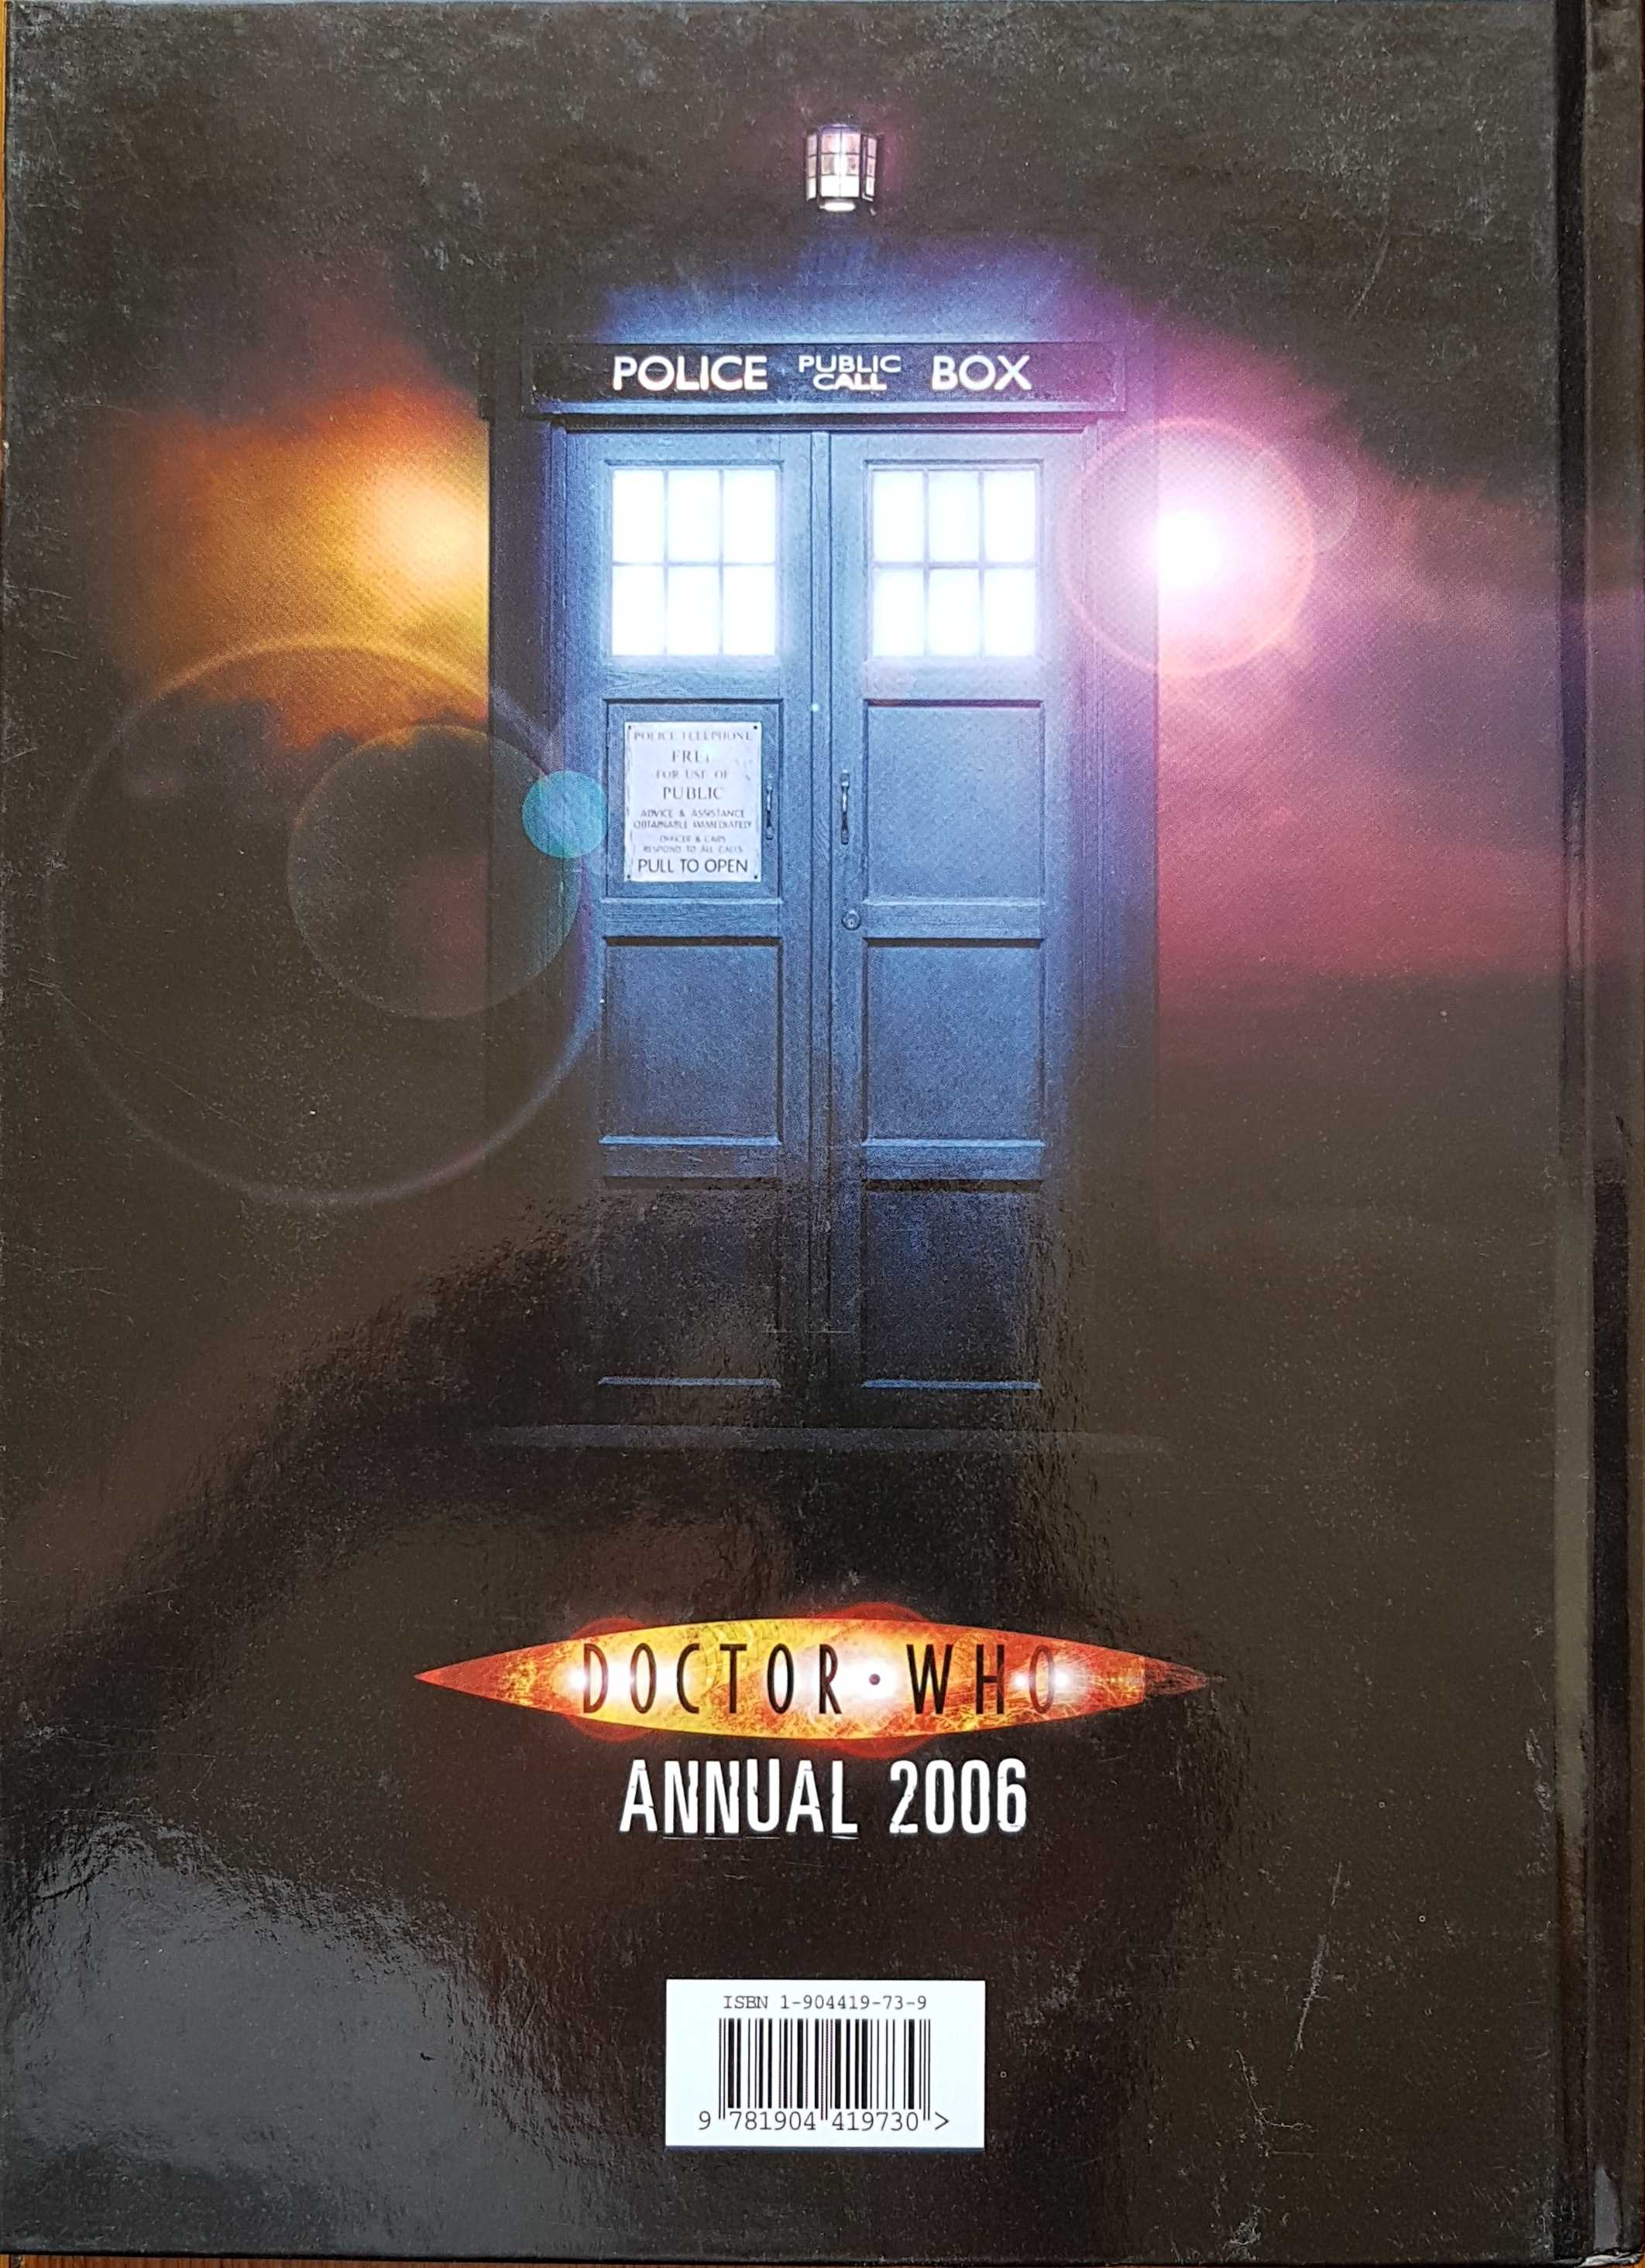 Picture of 1-904419-73-9 Doctor Who annual 2006 by artist Various from the BBC records and Tapes library